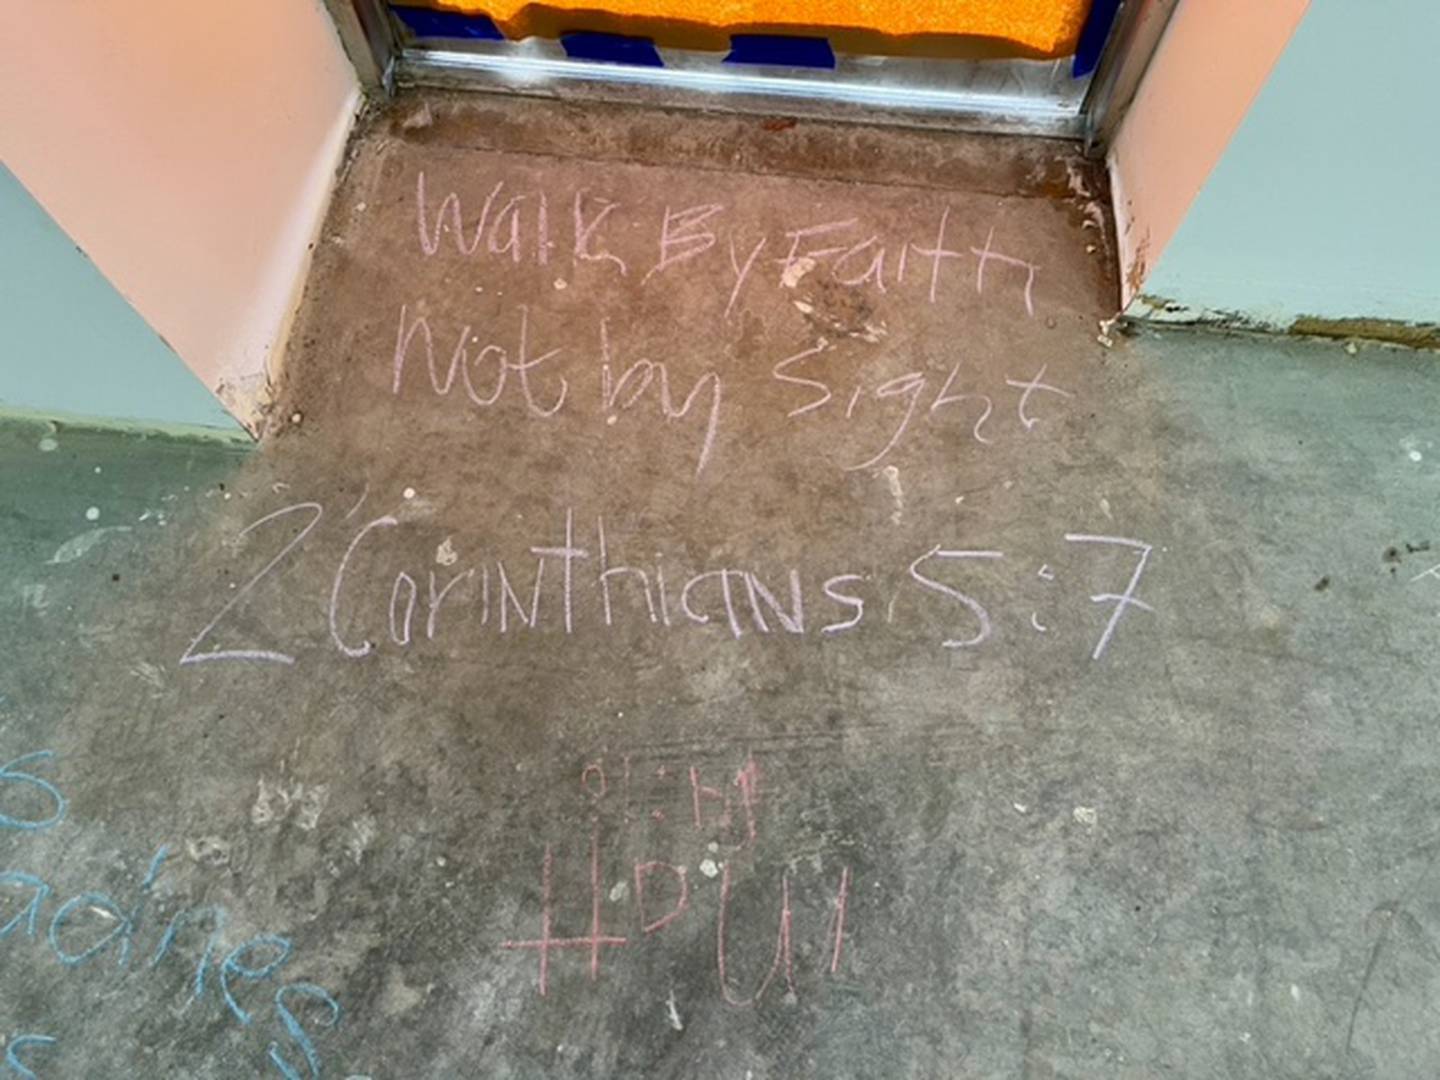 During The Way Church of Joliet's first prayer service at its new space on Theodore Street in Joliet, members wrote Bible verses on the bare floor.